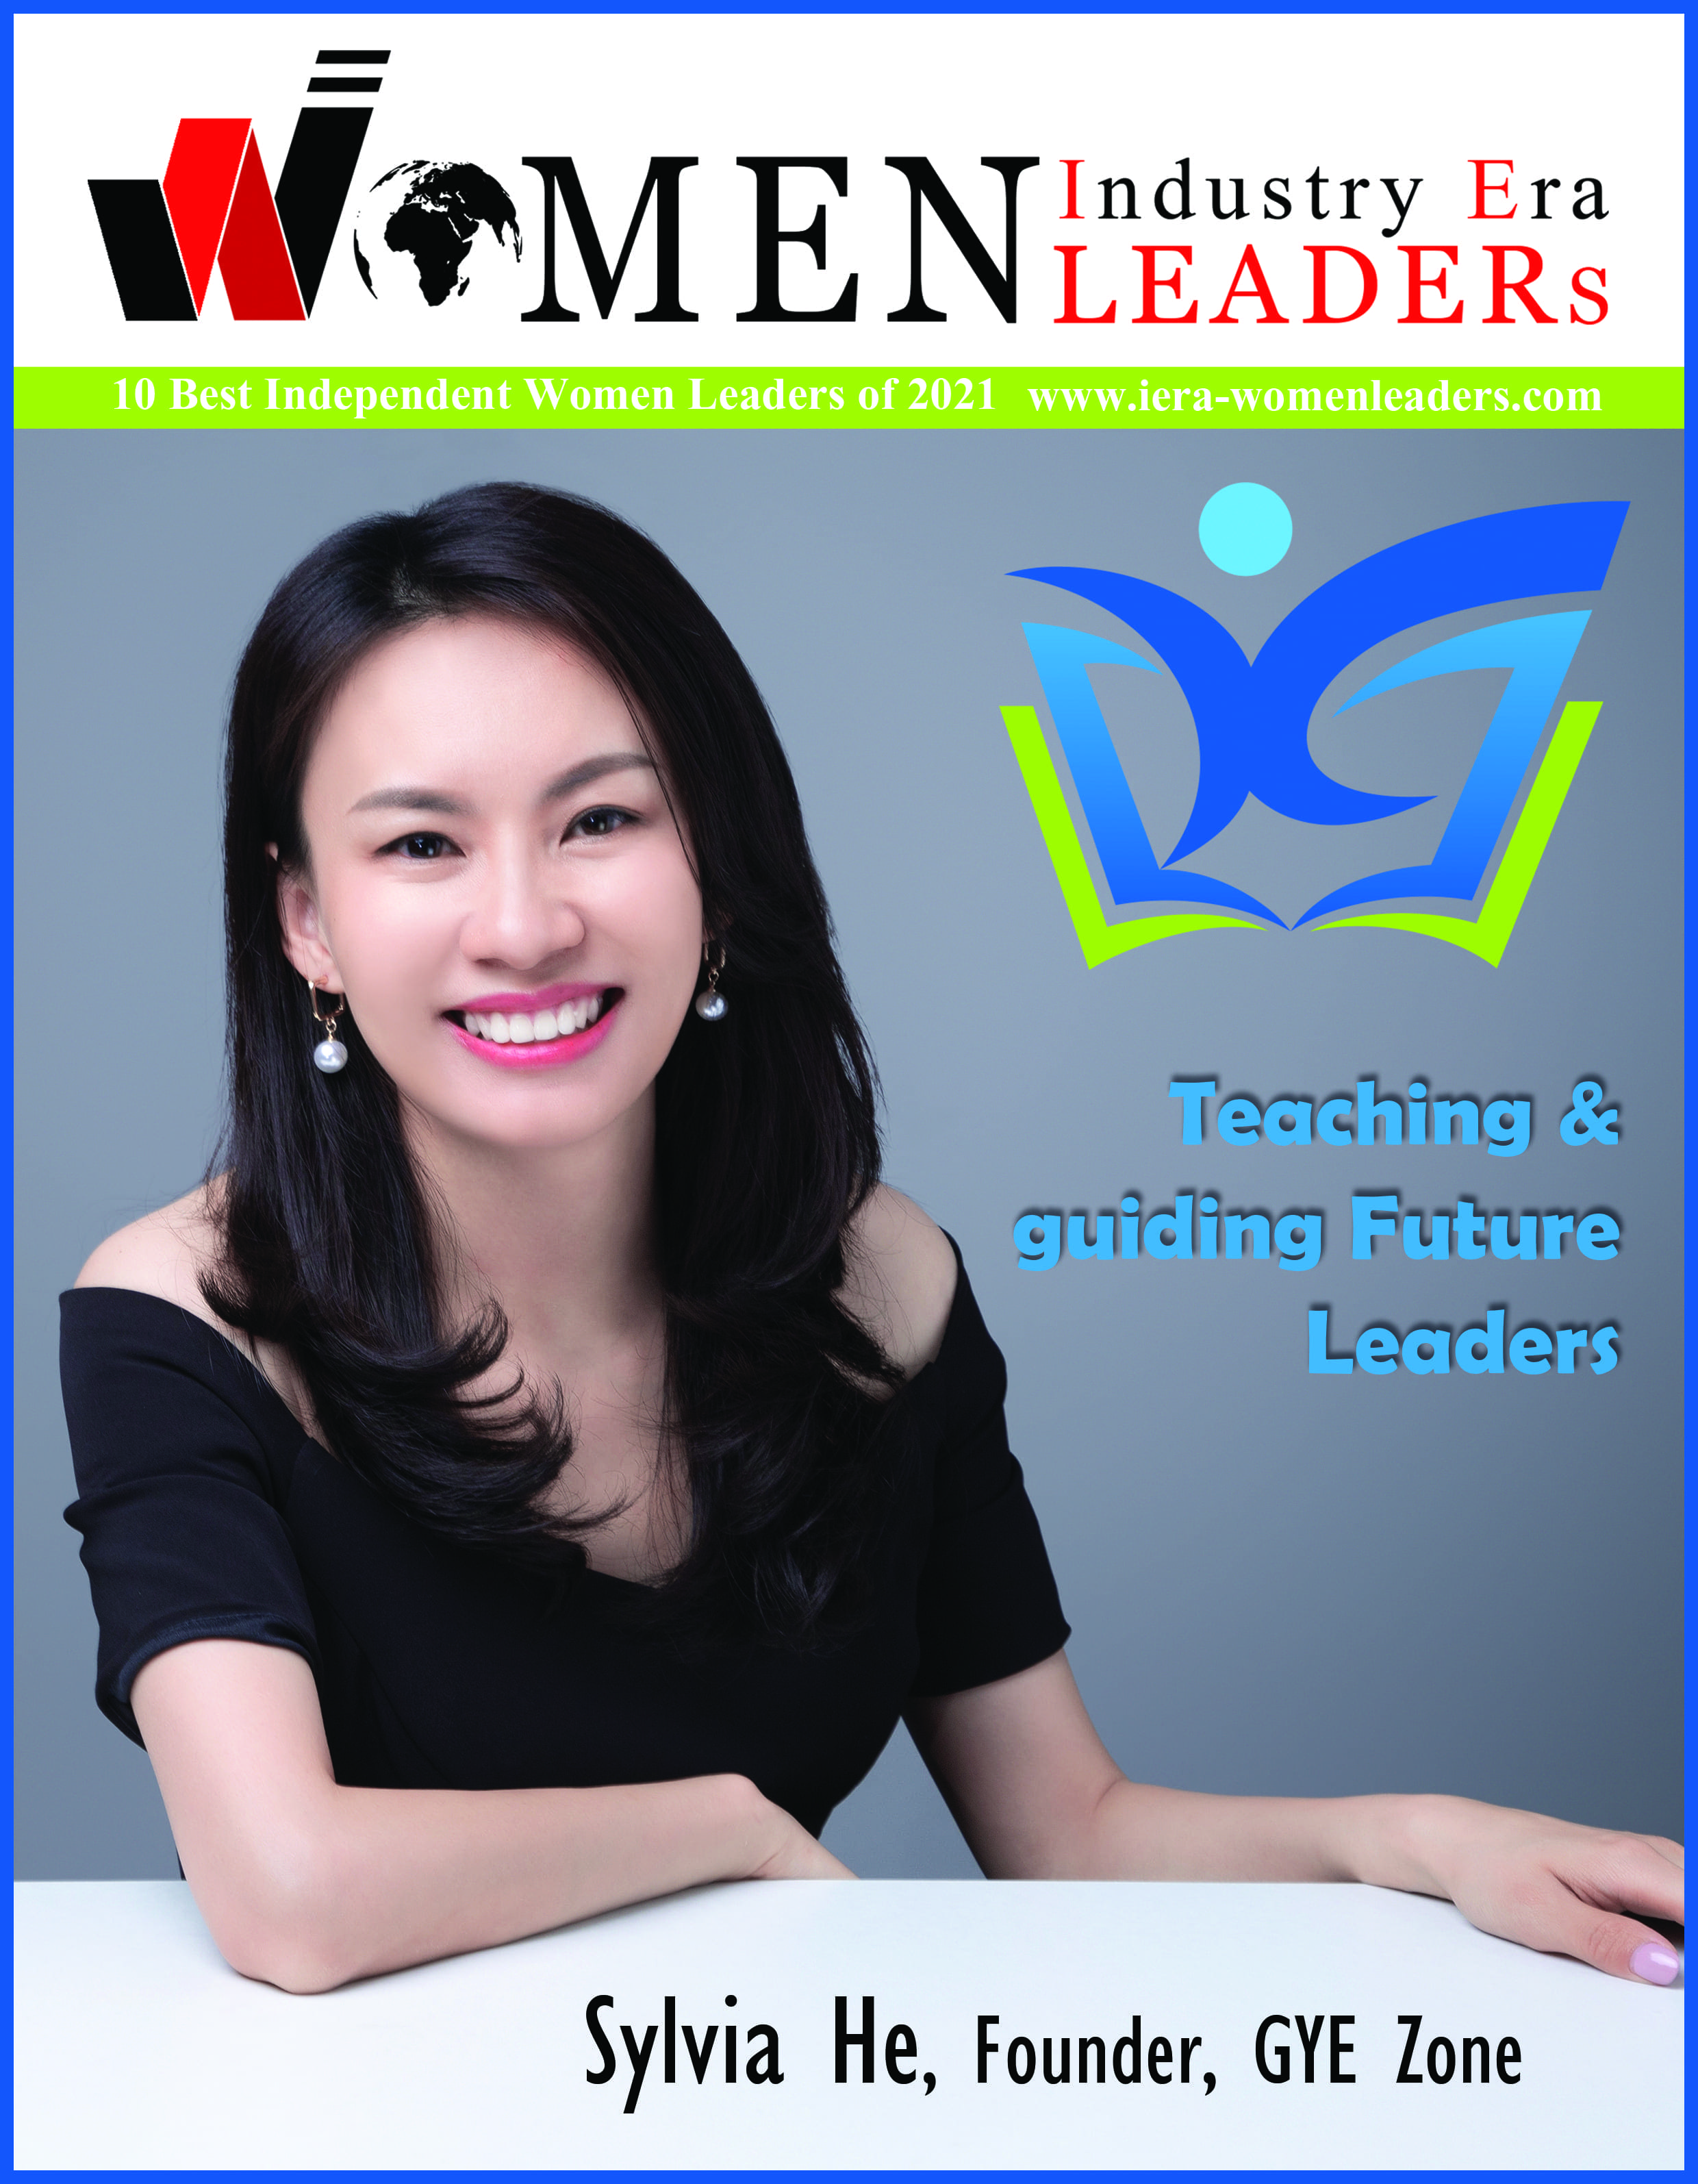 10 Best Independent Women Leaders of 2021 Magazine